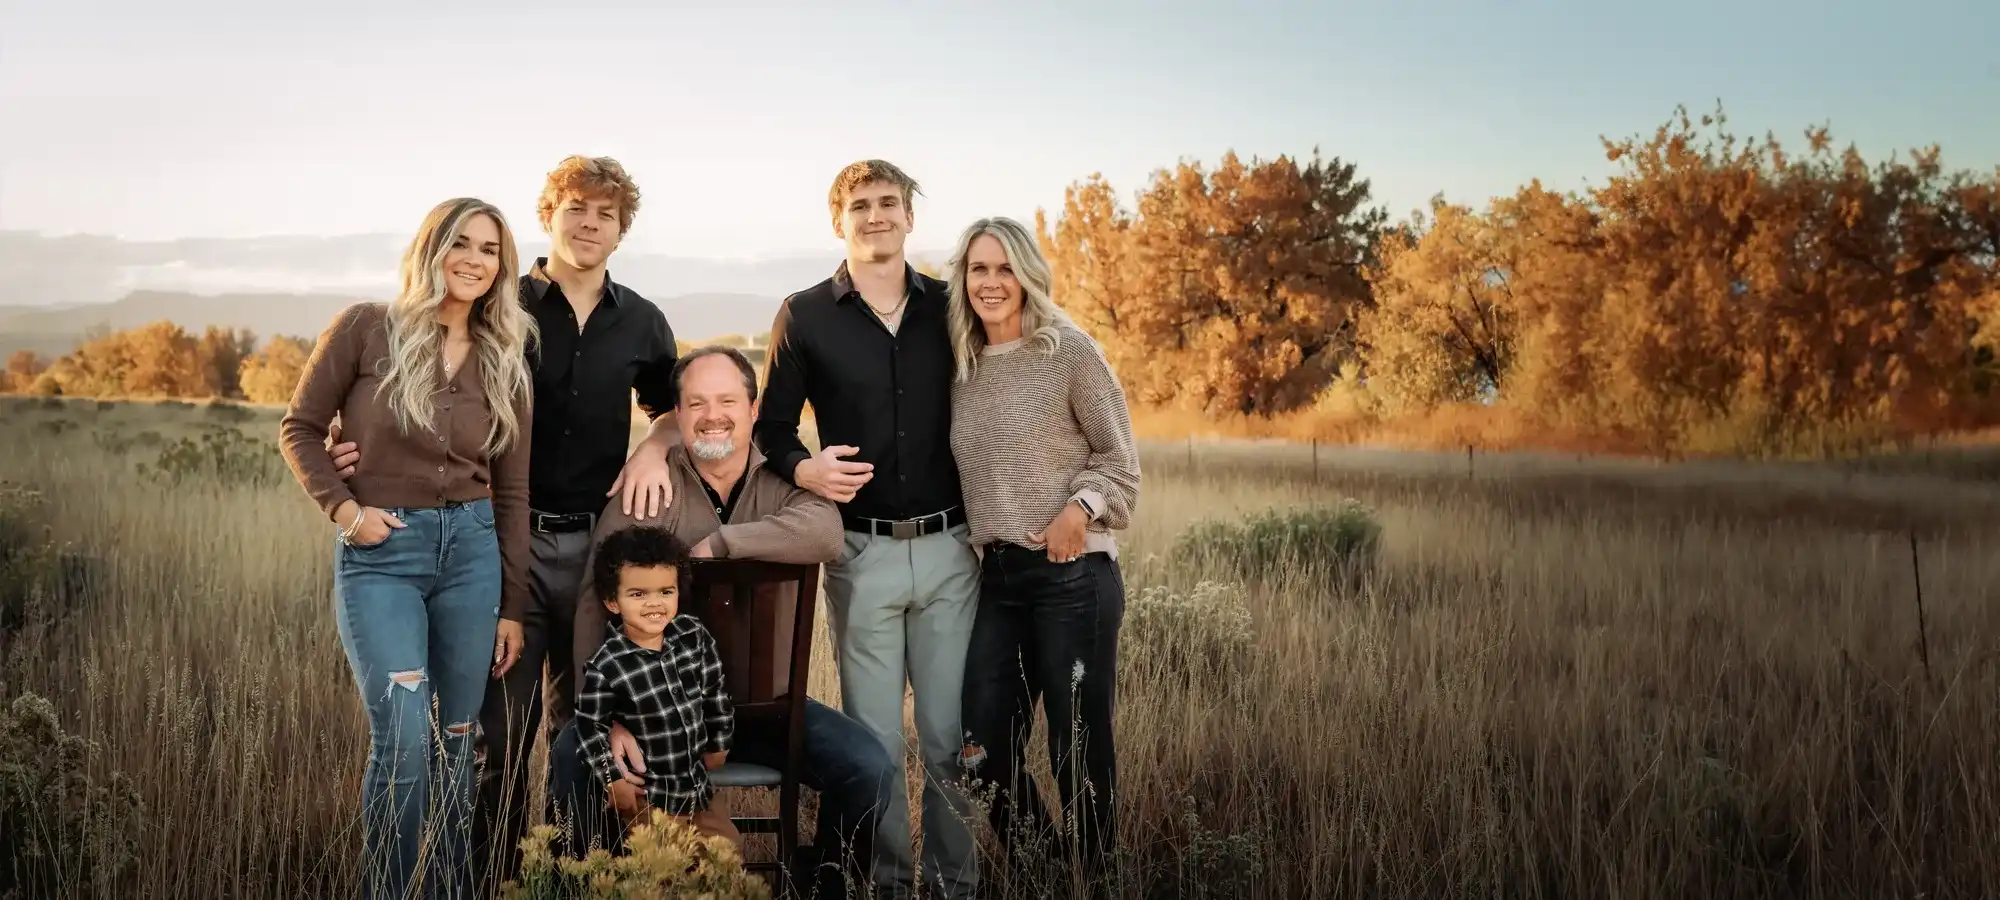 Chiropractor Fort Collins CO Chad Decklever With Family